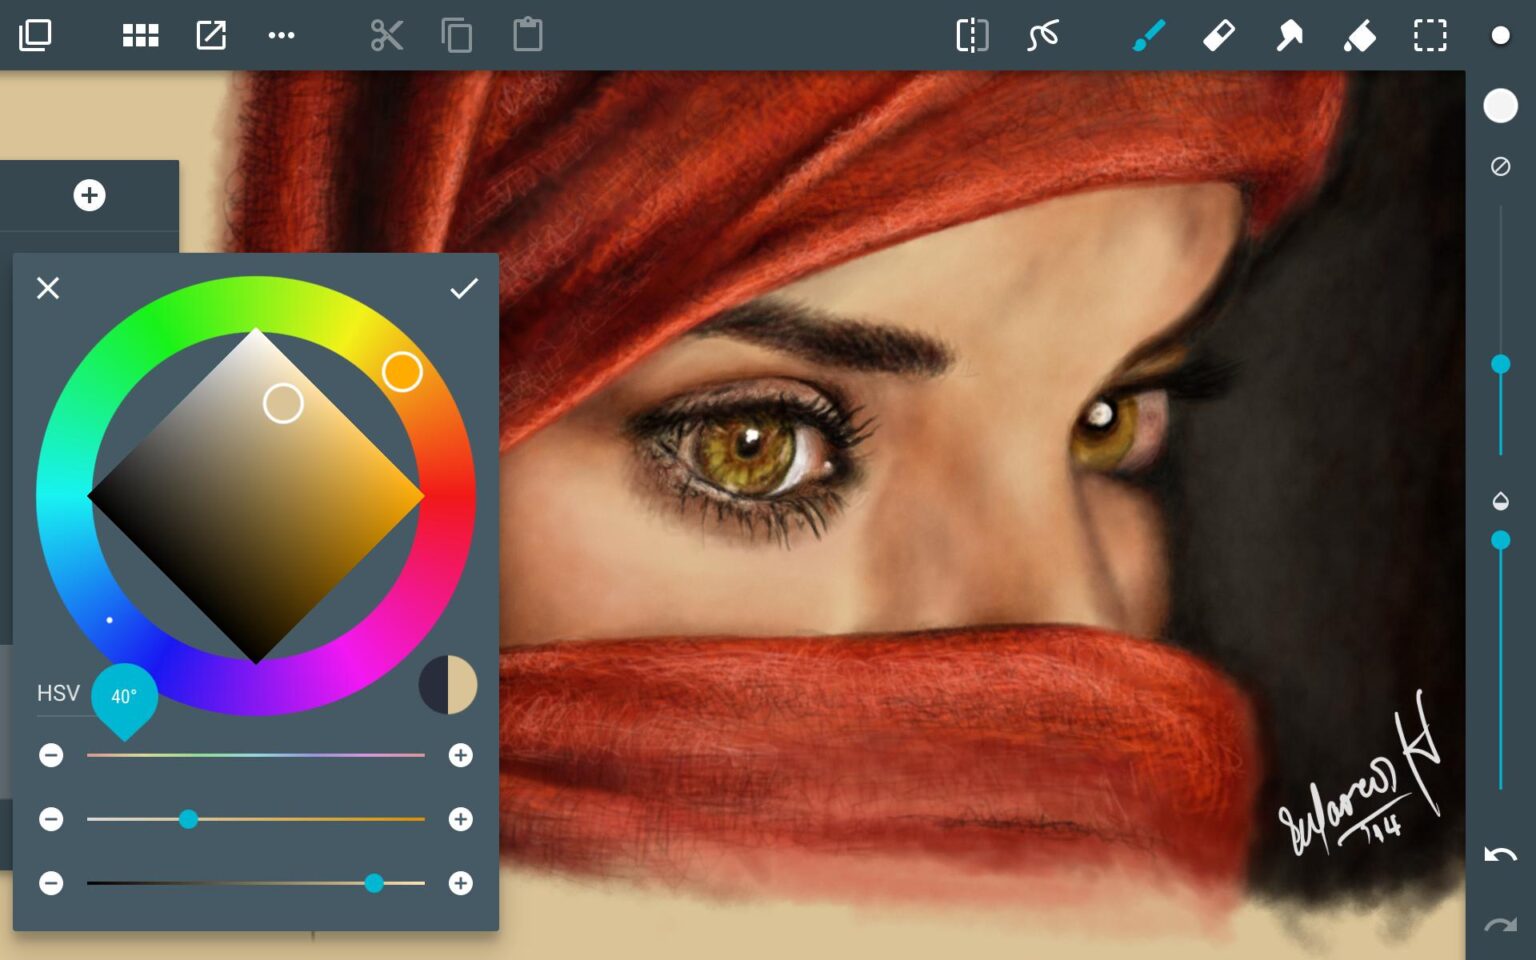 Best Digital Art Apps Of all time to slay your skills